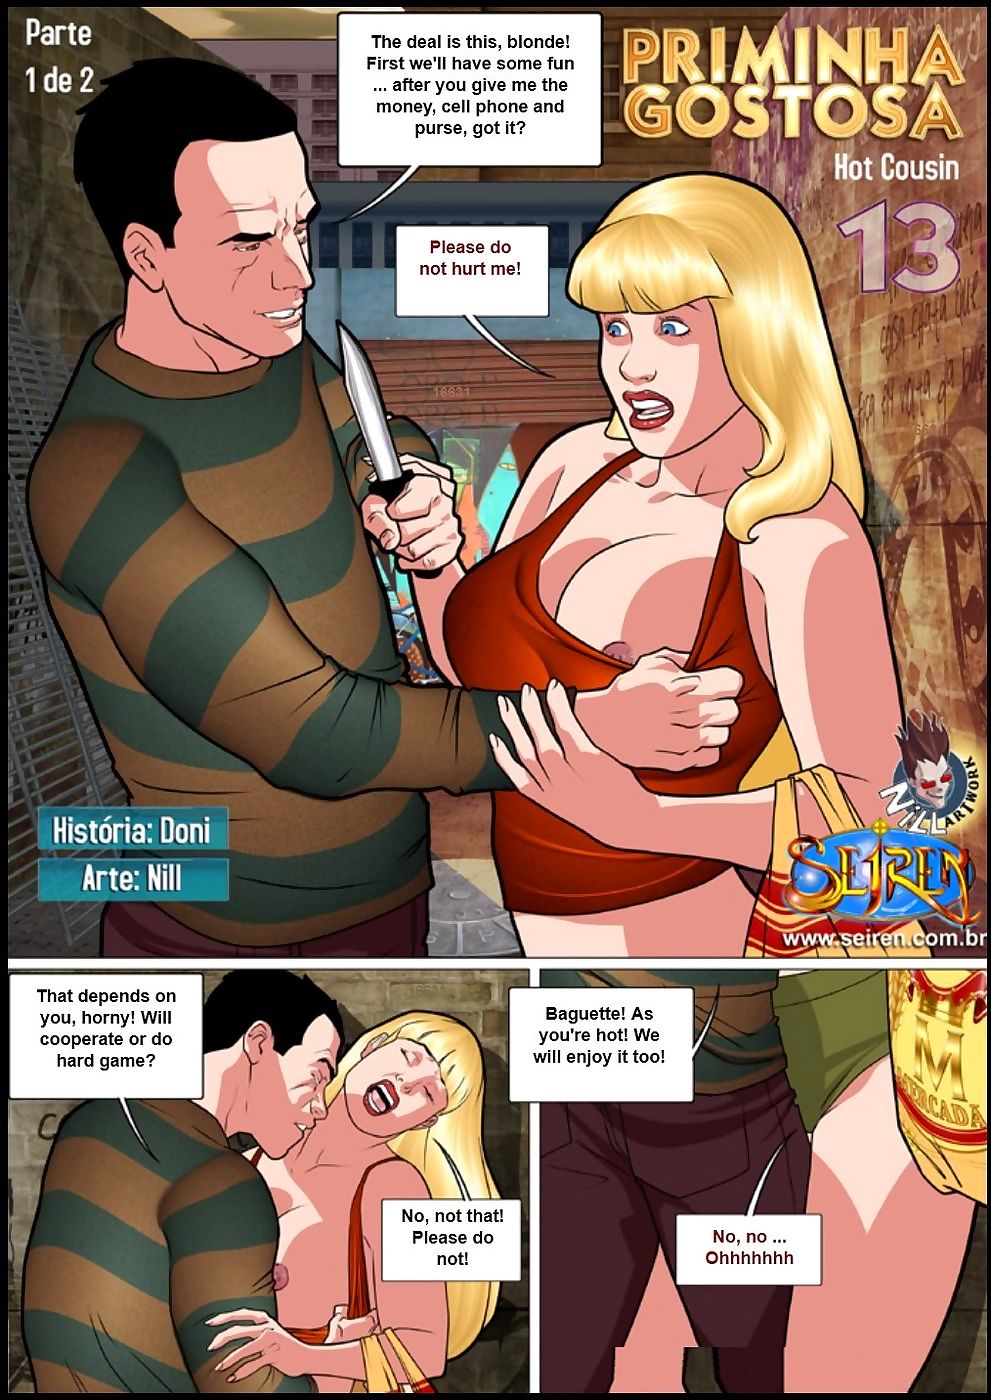 Priminha Gostosa 13- Hot Cousin 1 page 1